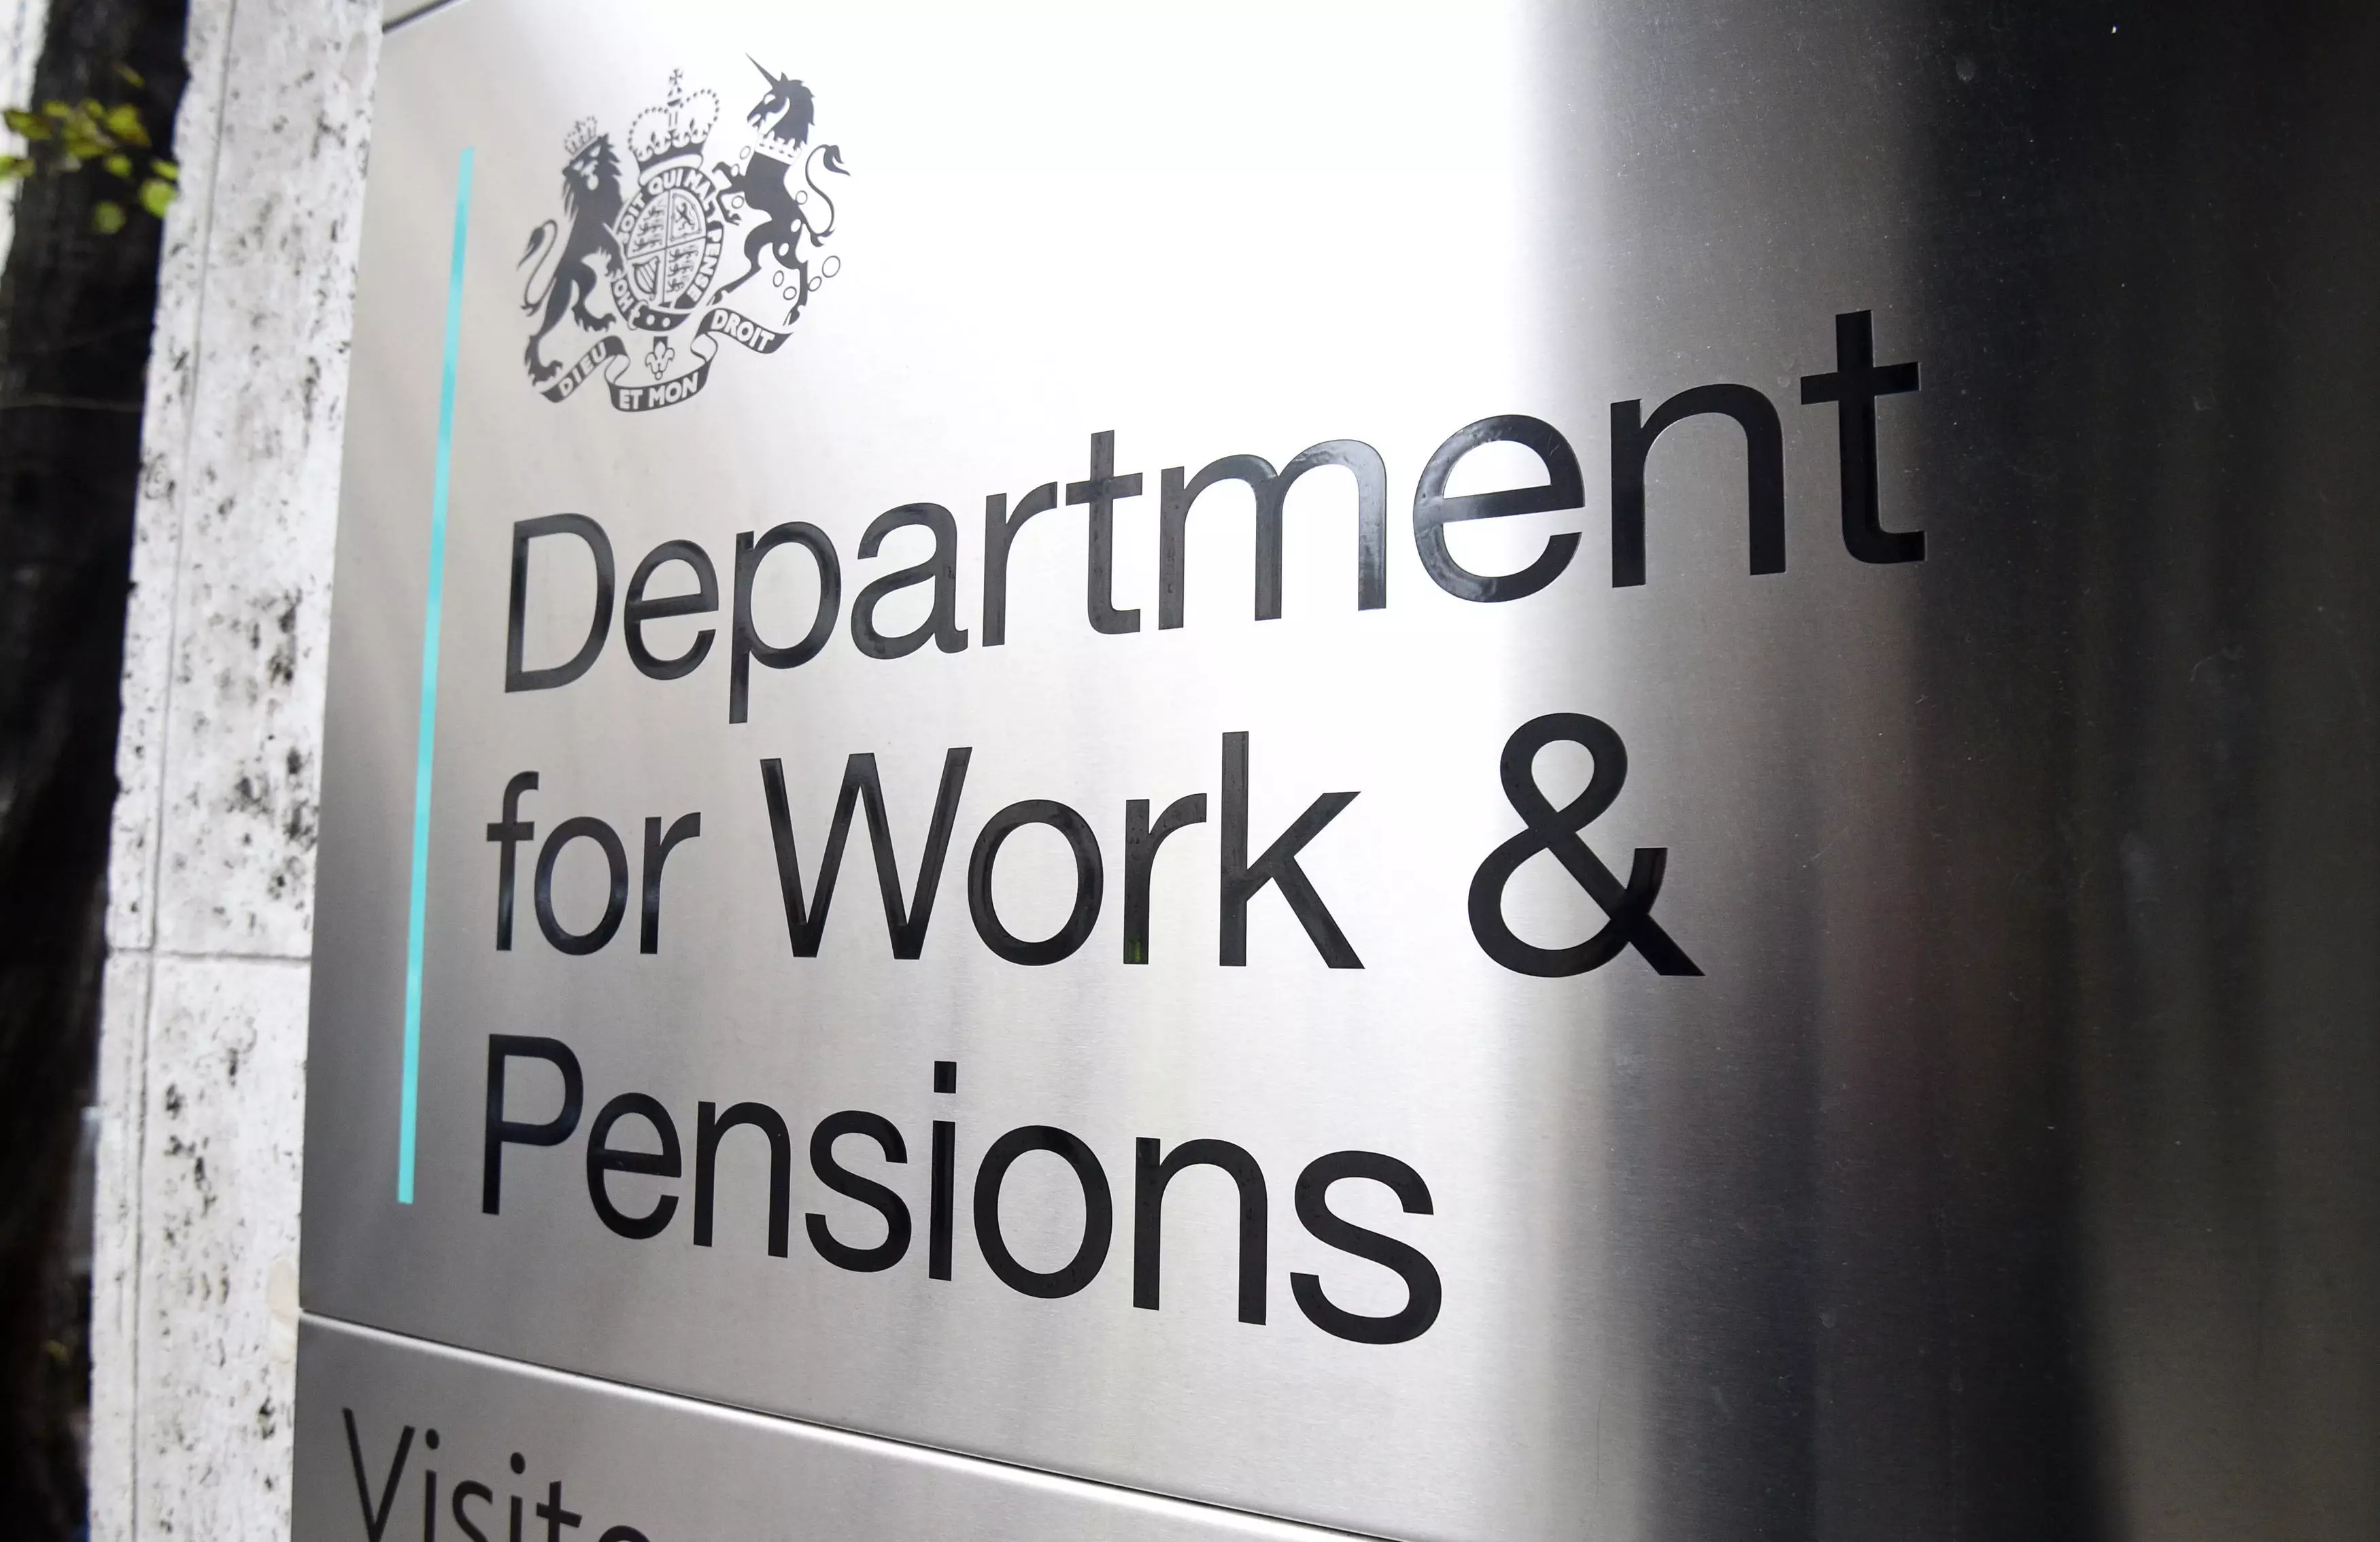 The Department for Work and Pensions have said they will appeal this ruling (